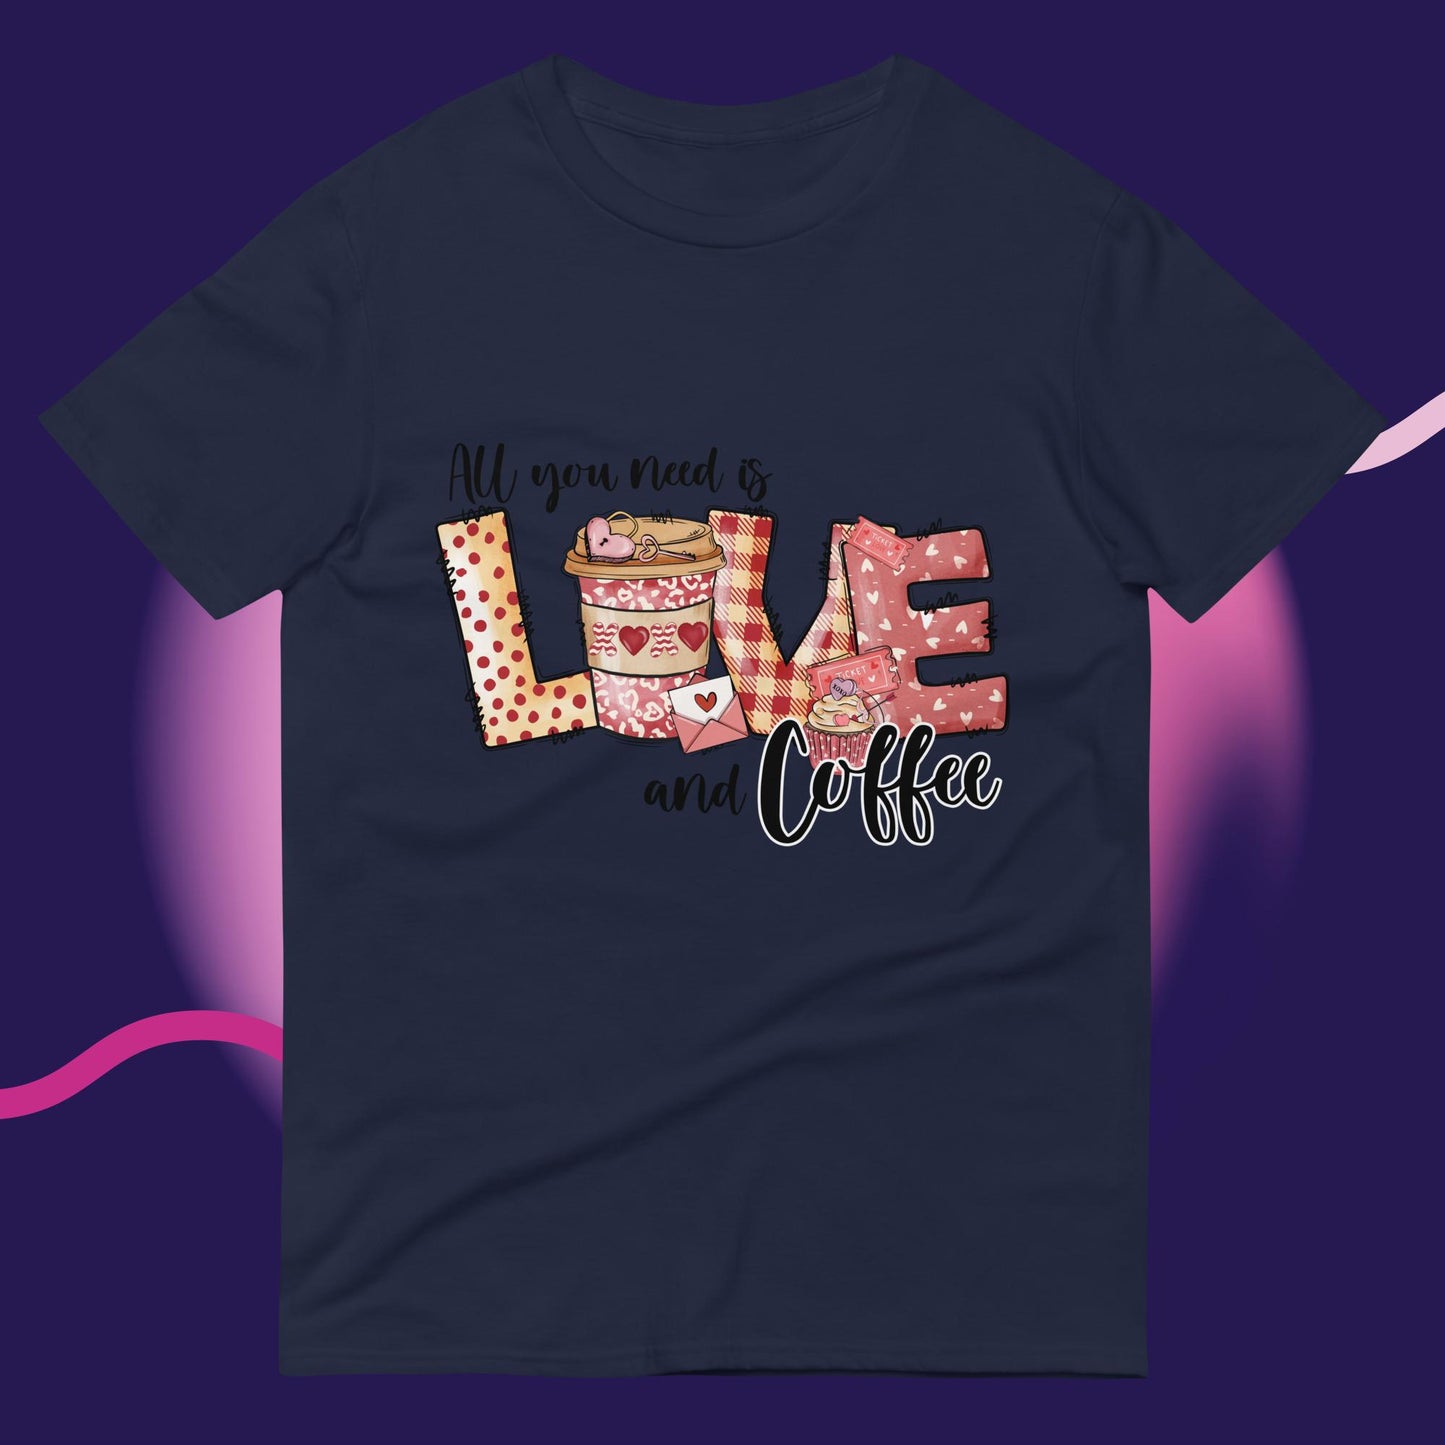 Sparkle-kiss-creations-all-you-need-is-love-coffee-t-shirt-navy